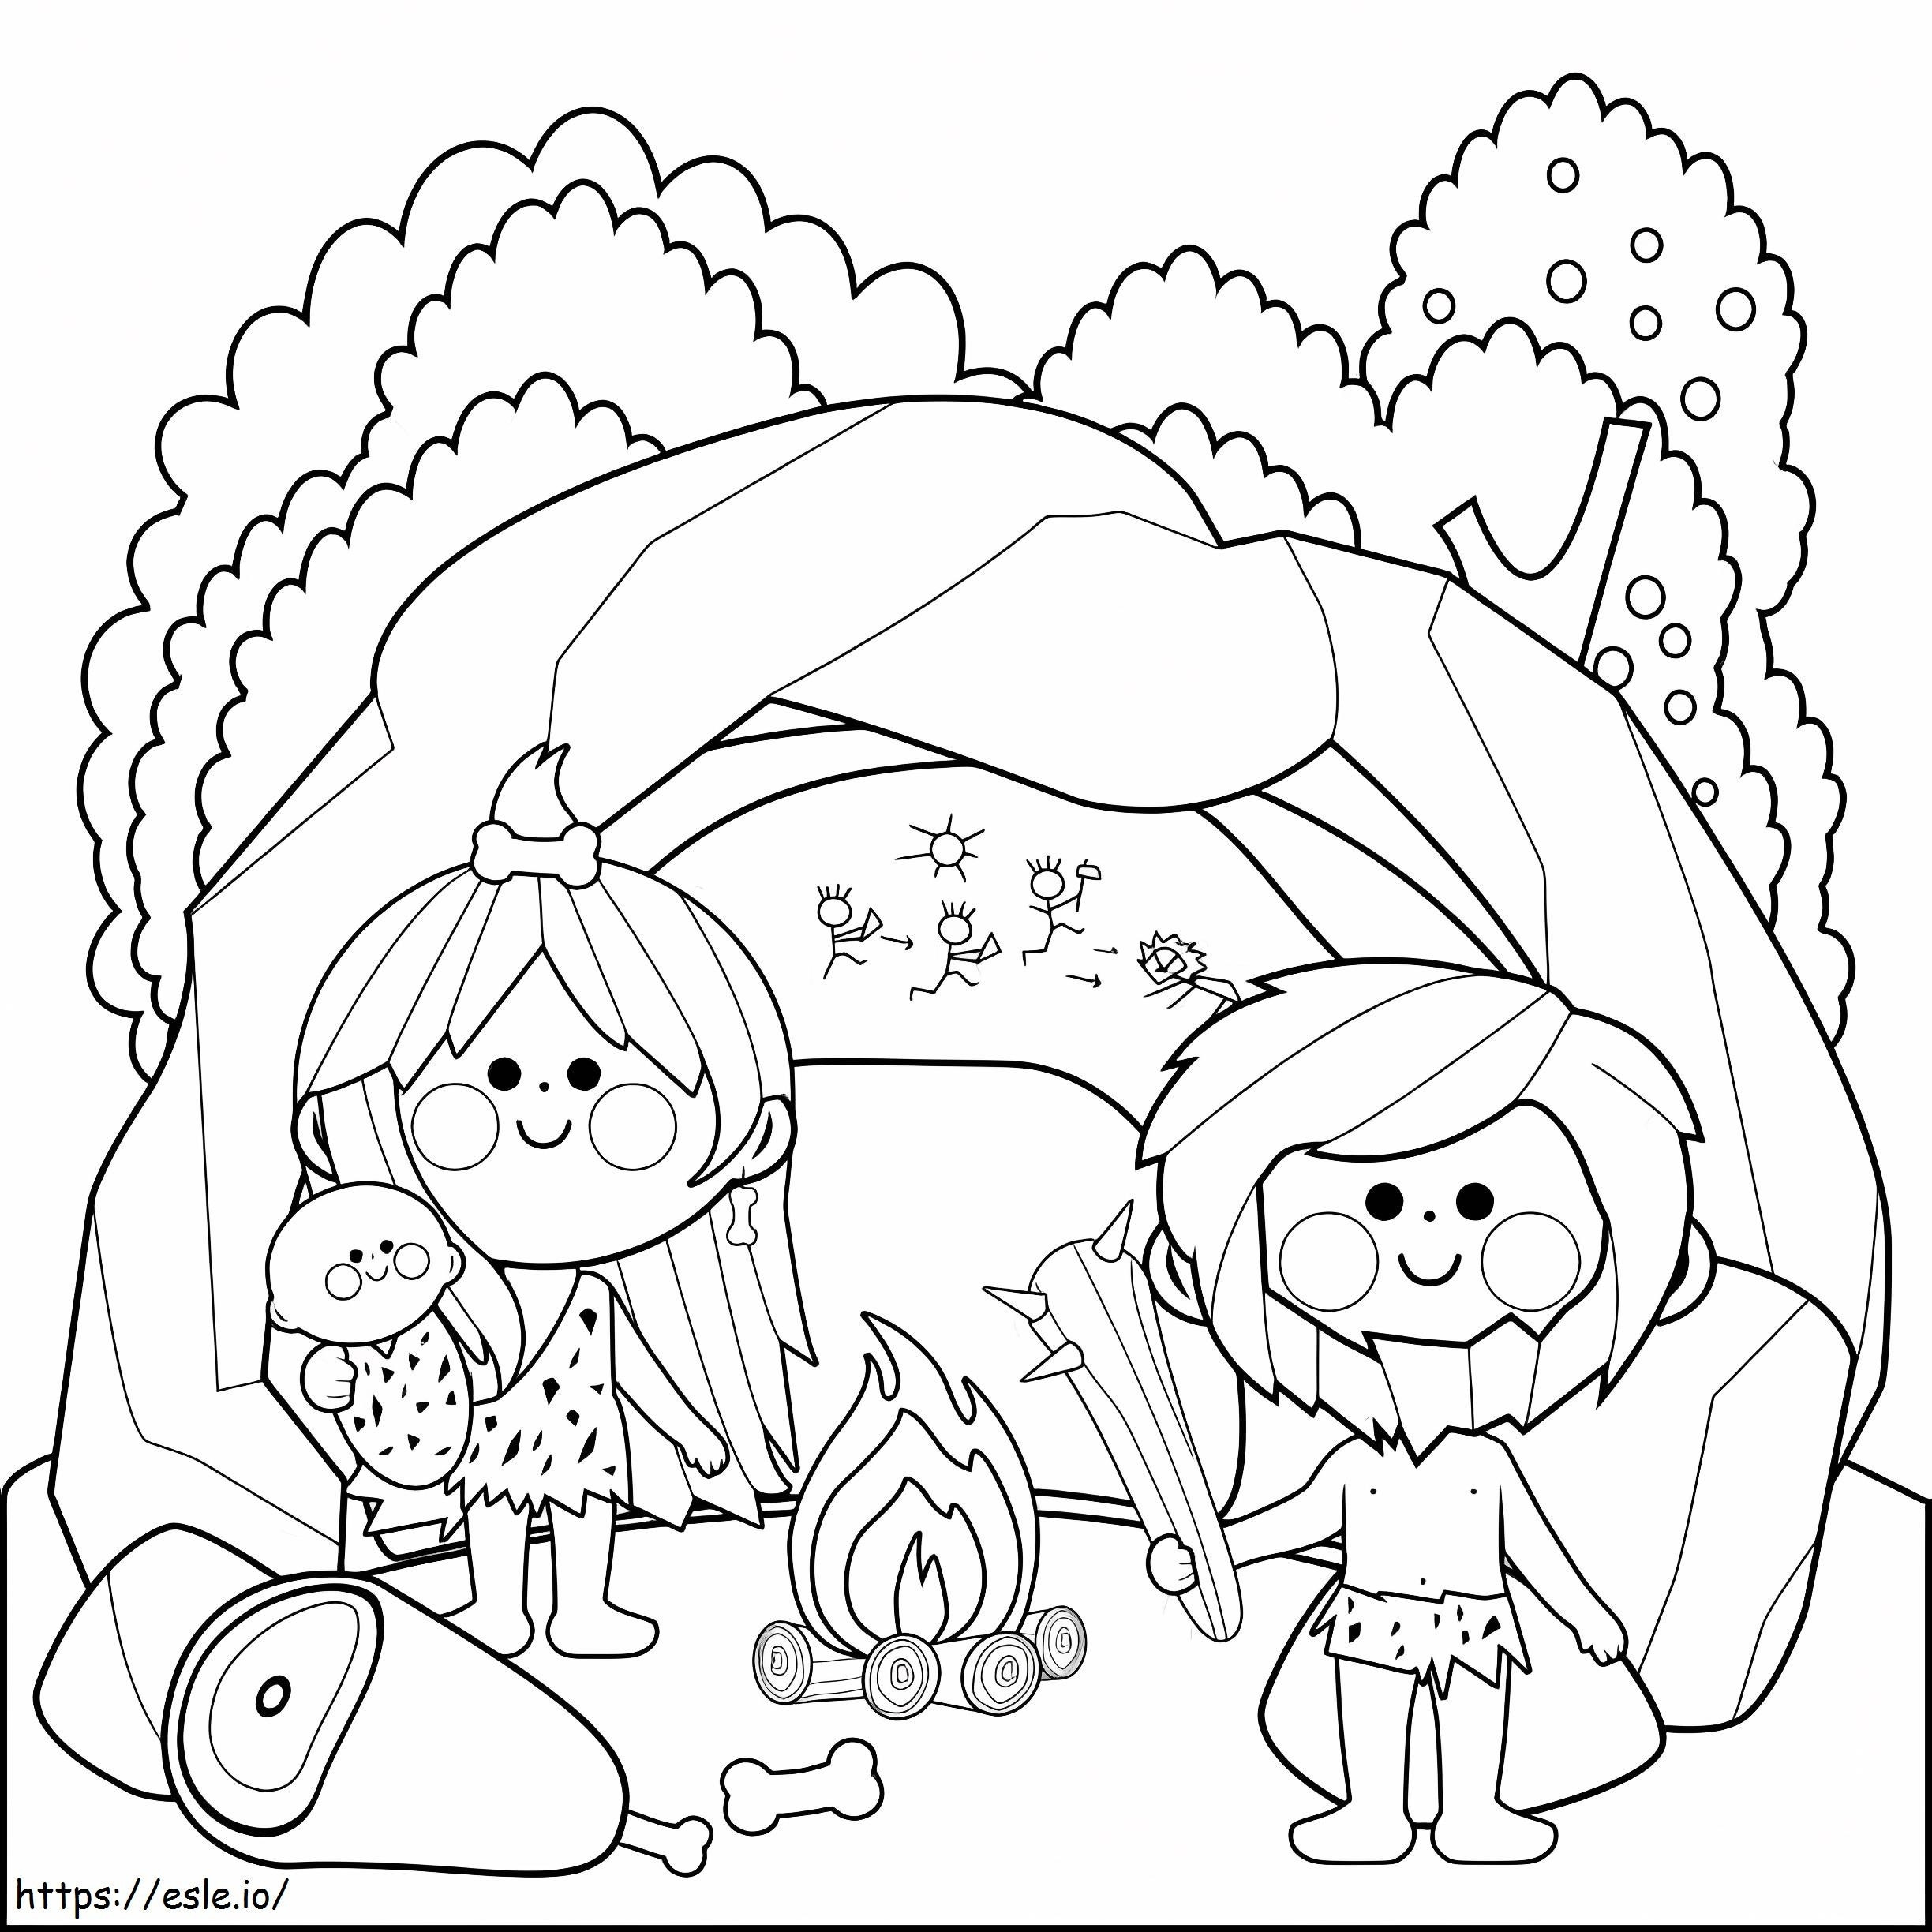 Stone Age Family coloring page